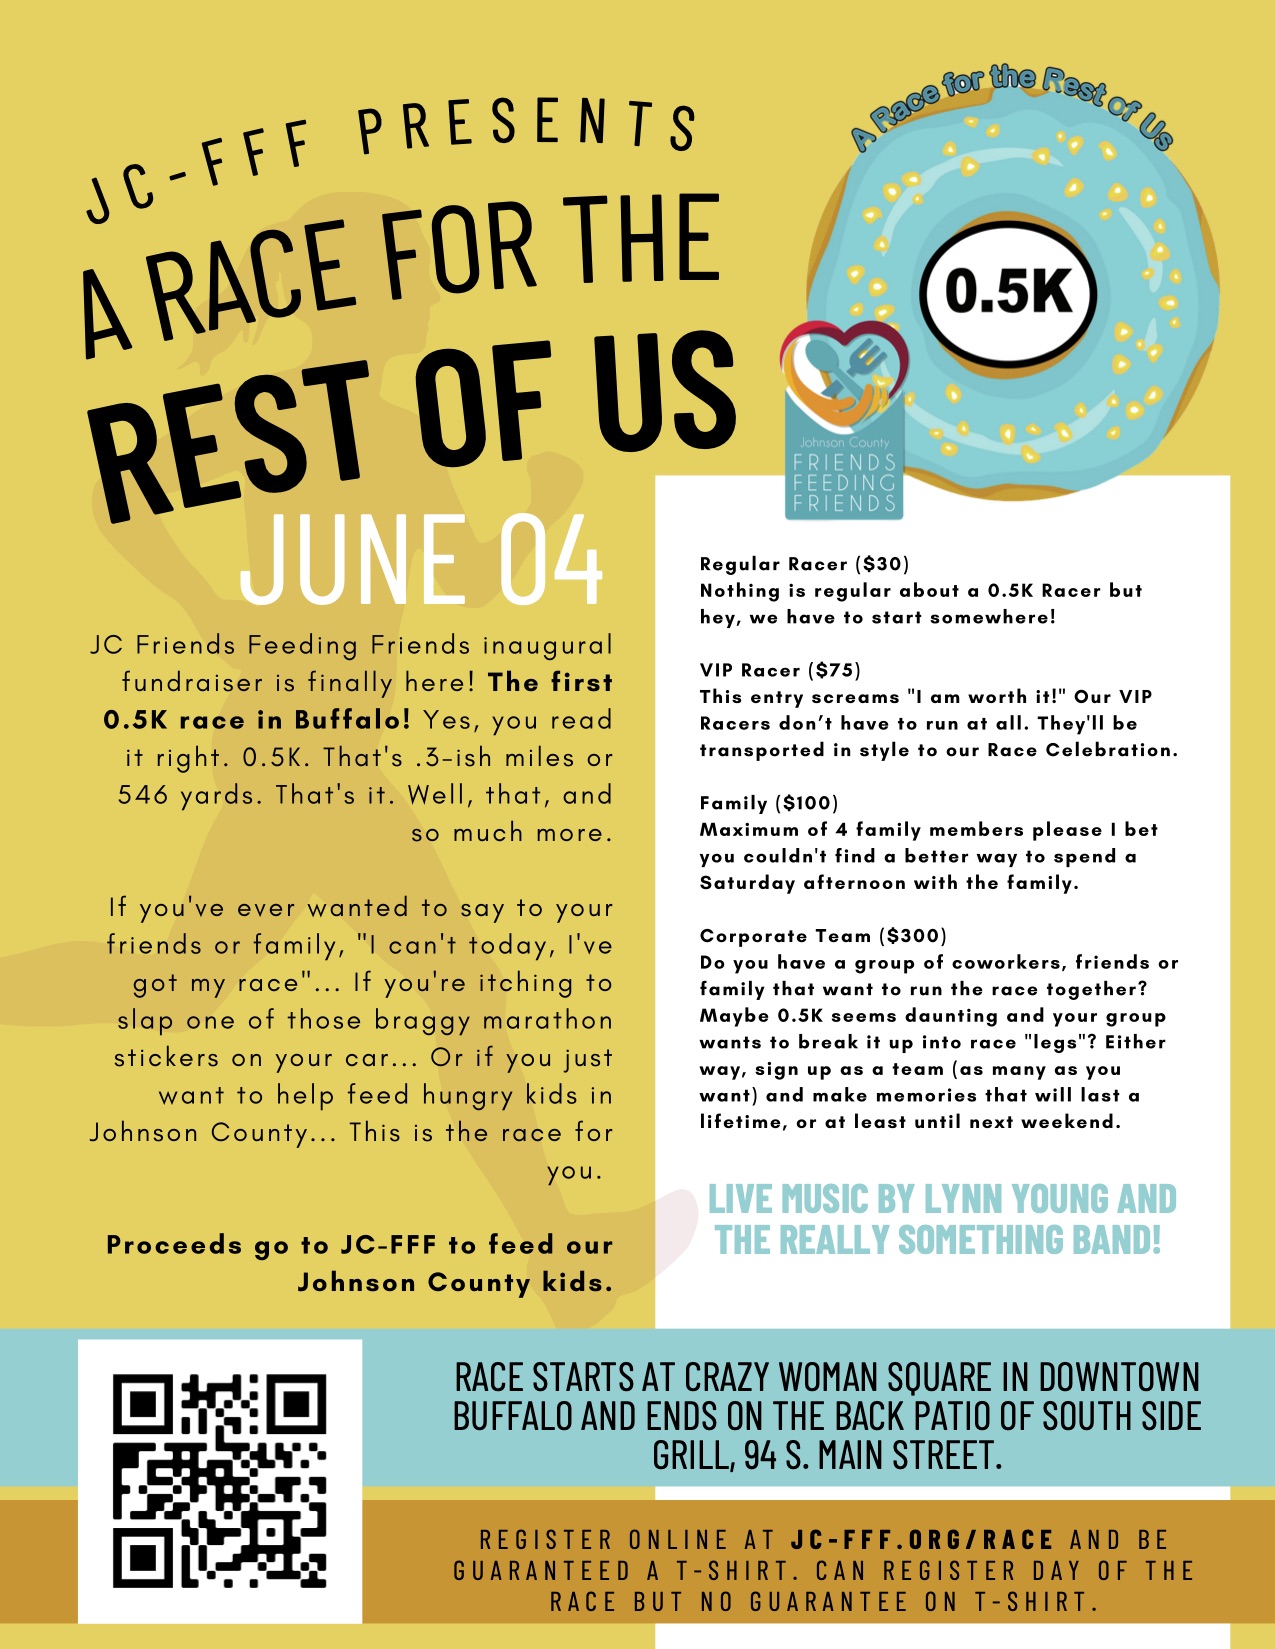 Sign Up Now for JC-FFF’s 1st Annual 0.5K Race for the Rest of Us – June 4, 2022 @ 4:00 pm